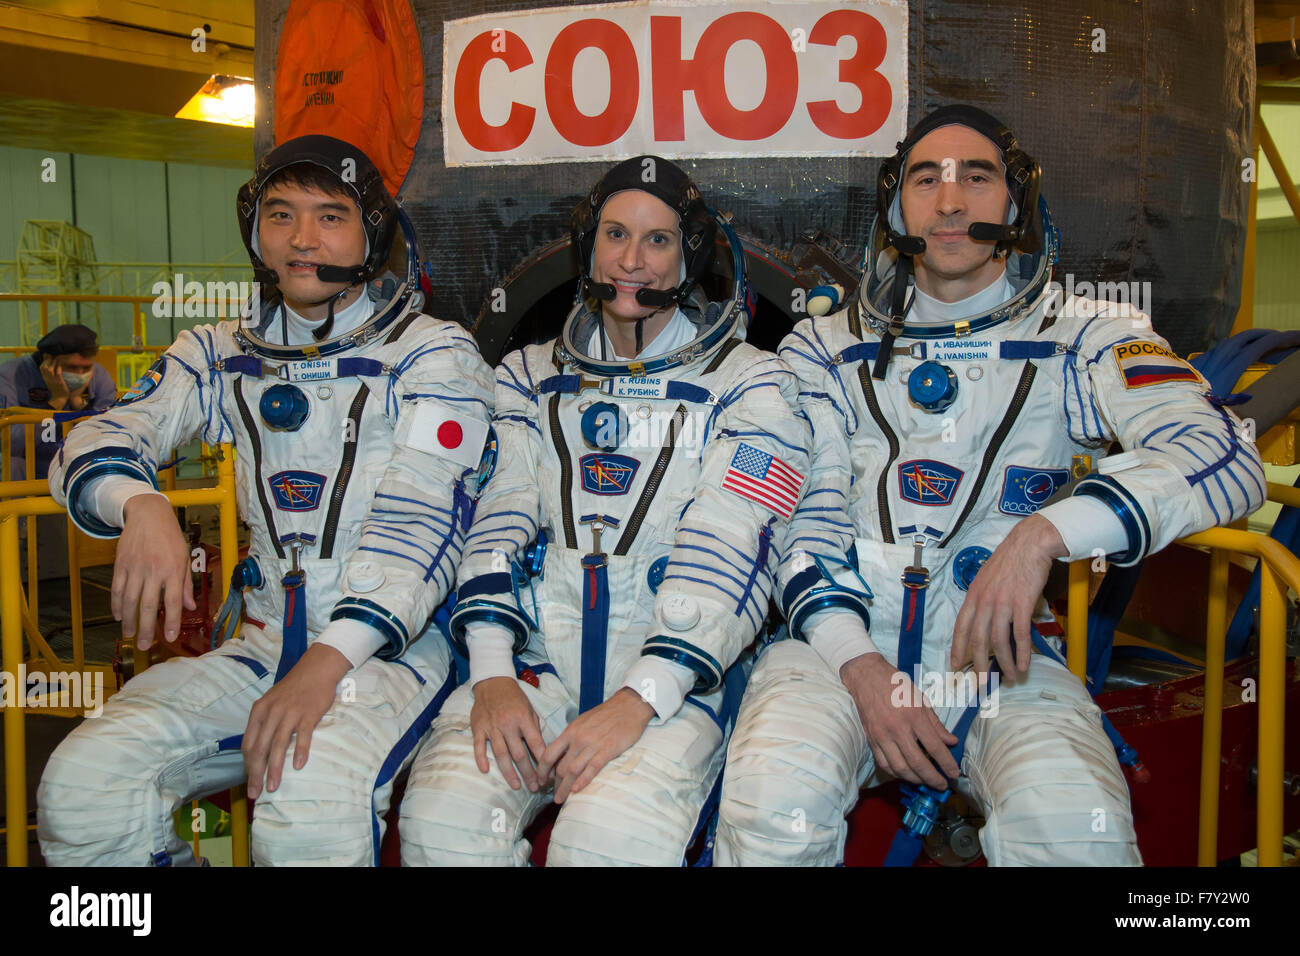 International Space Station Expedition 46 backup crew members pose in front of their Soyuz TMA-19M spacecraft during a crew fit check at the Gagarin Space Center December 1, 2015 in Star City, Russia. Backup crew members (L-R): Japan Aerospace Exploration Agency astronaut Takuya Onishi, NASA astronaut Kate Rubins  and Roscosmos cosmonaut Anatoly Ivanishin. Stock Photo